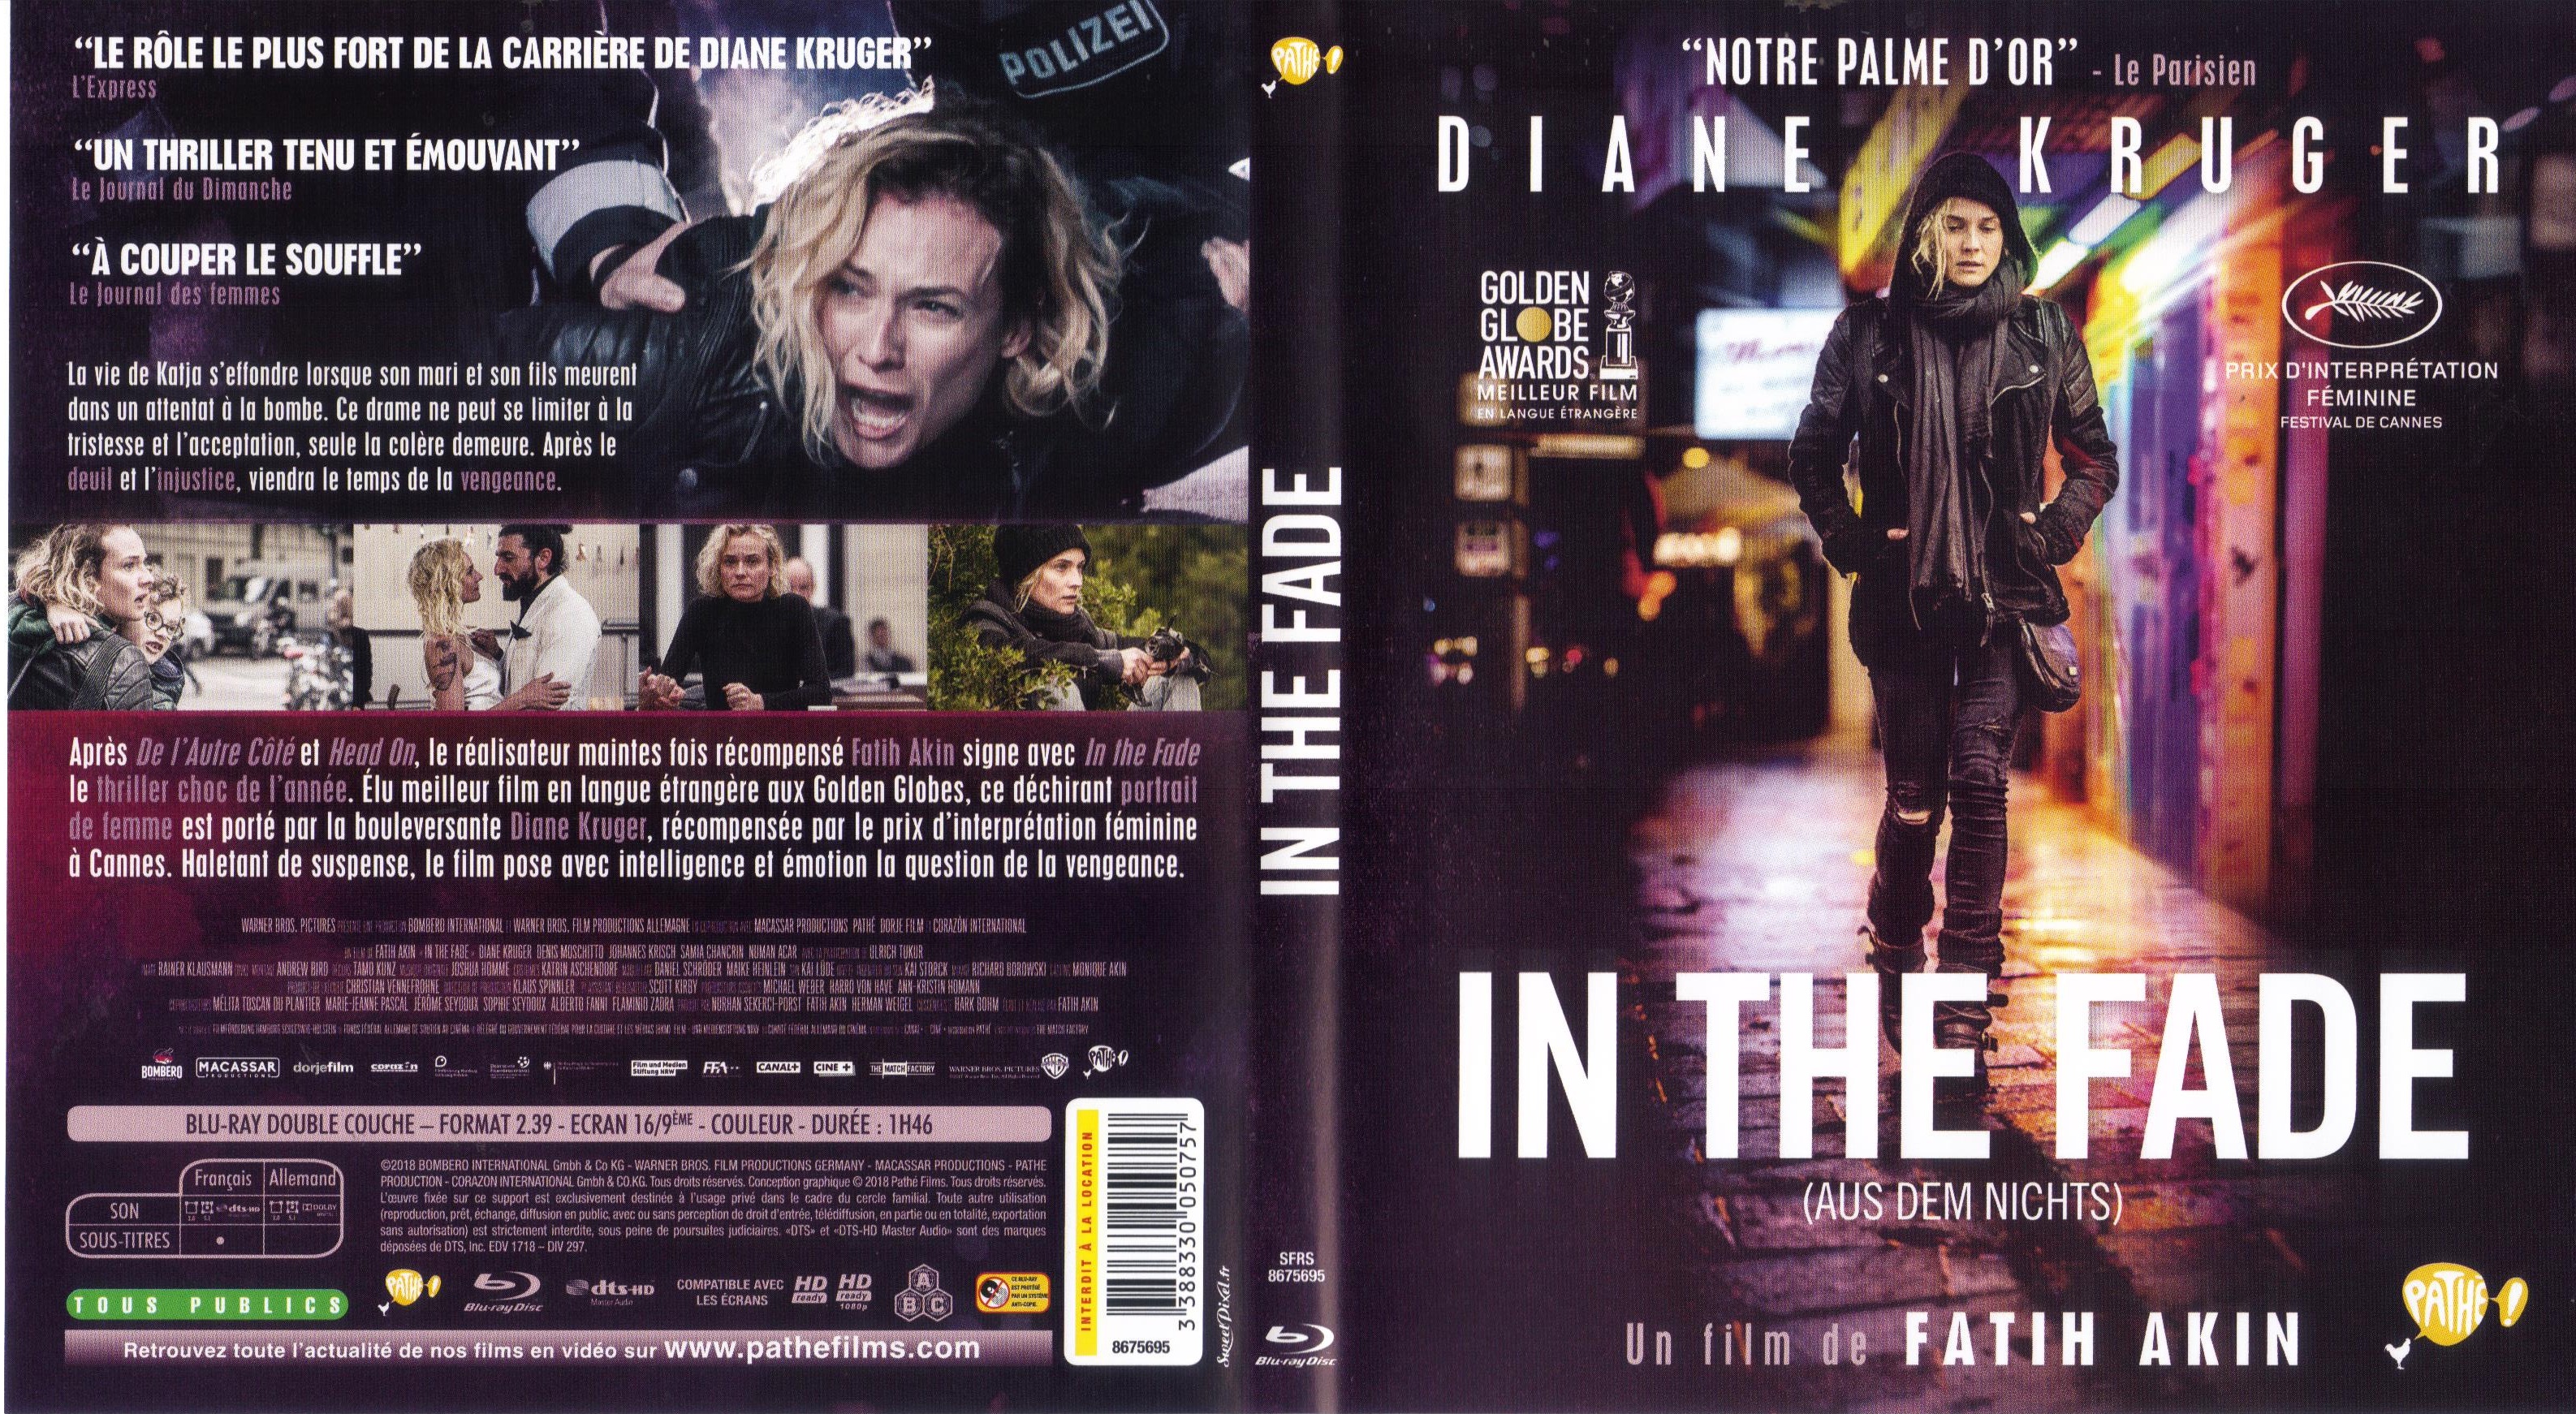 Jaquette DVD In the fade (BLU-RAY)